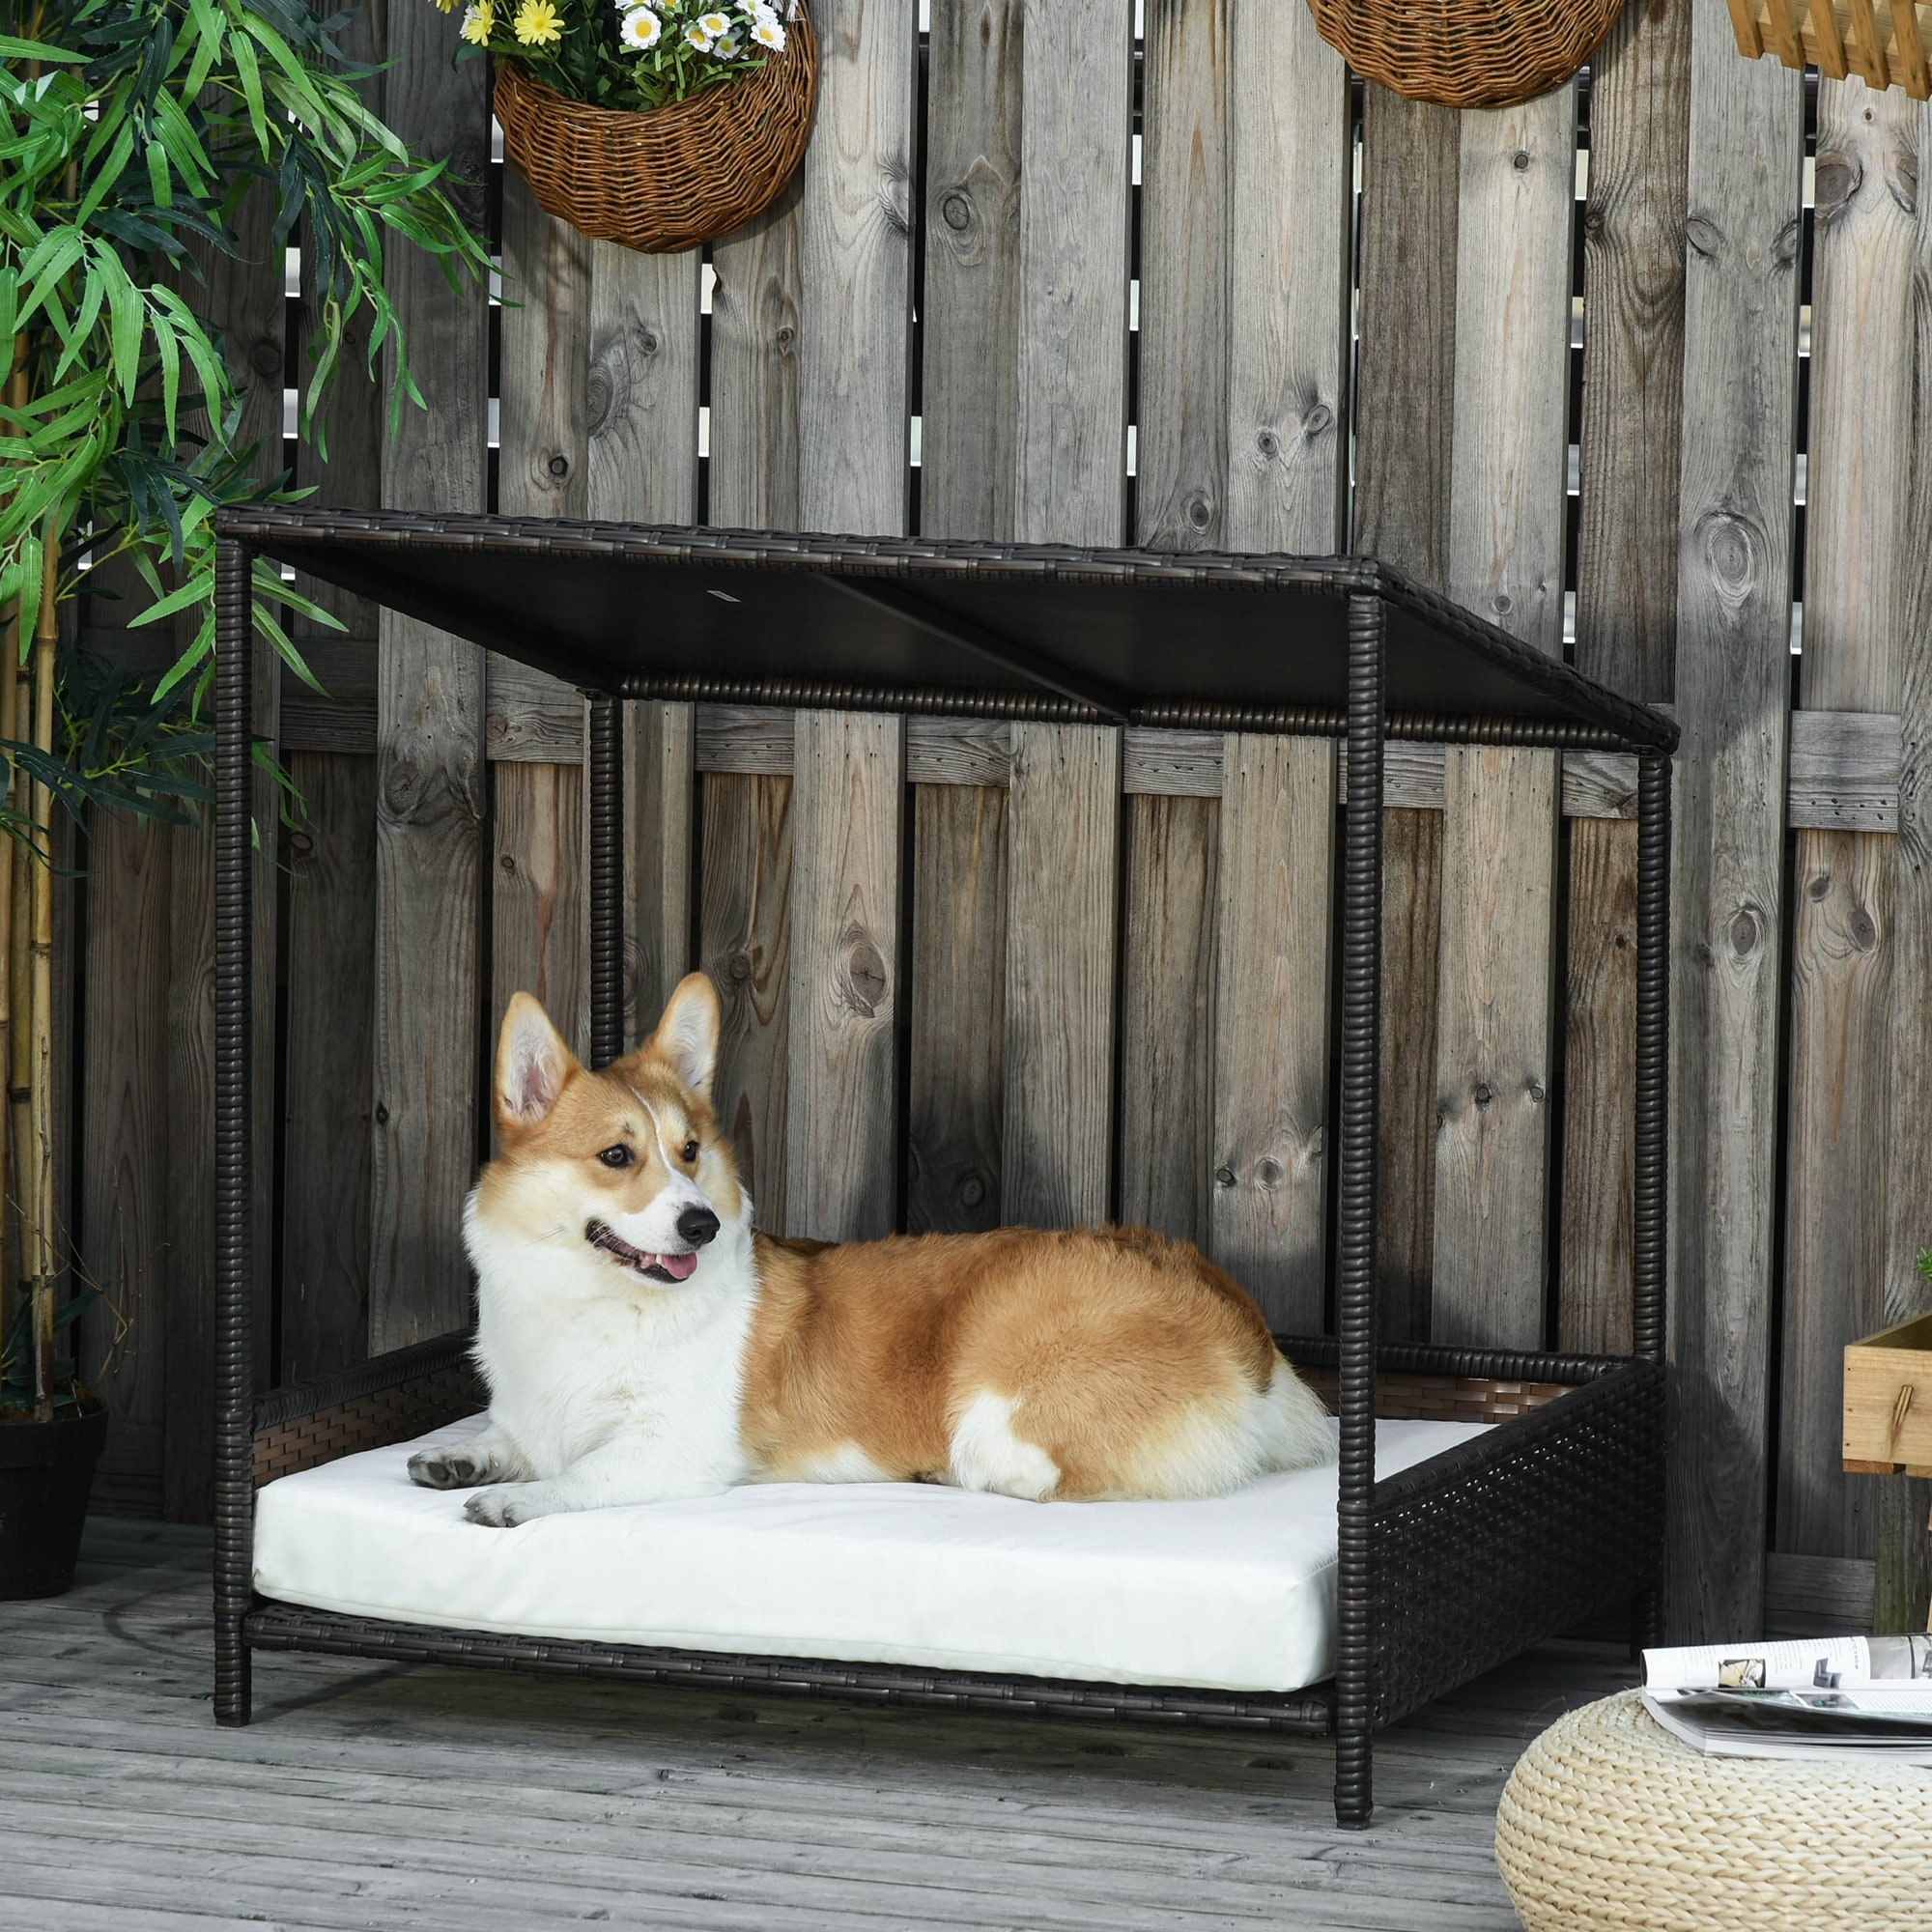 PawHut Wicker Dog House, Rattan Pet Bed, Cat House, End Table Furniture,  with Soft Cushion, Adjustable Feet, for X-Small Dogs